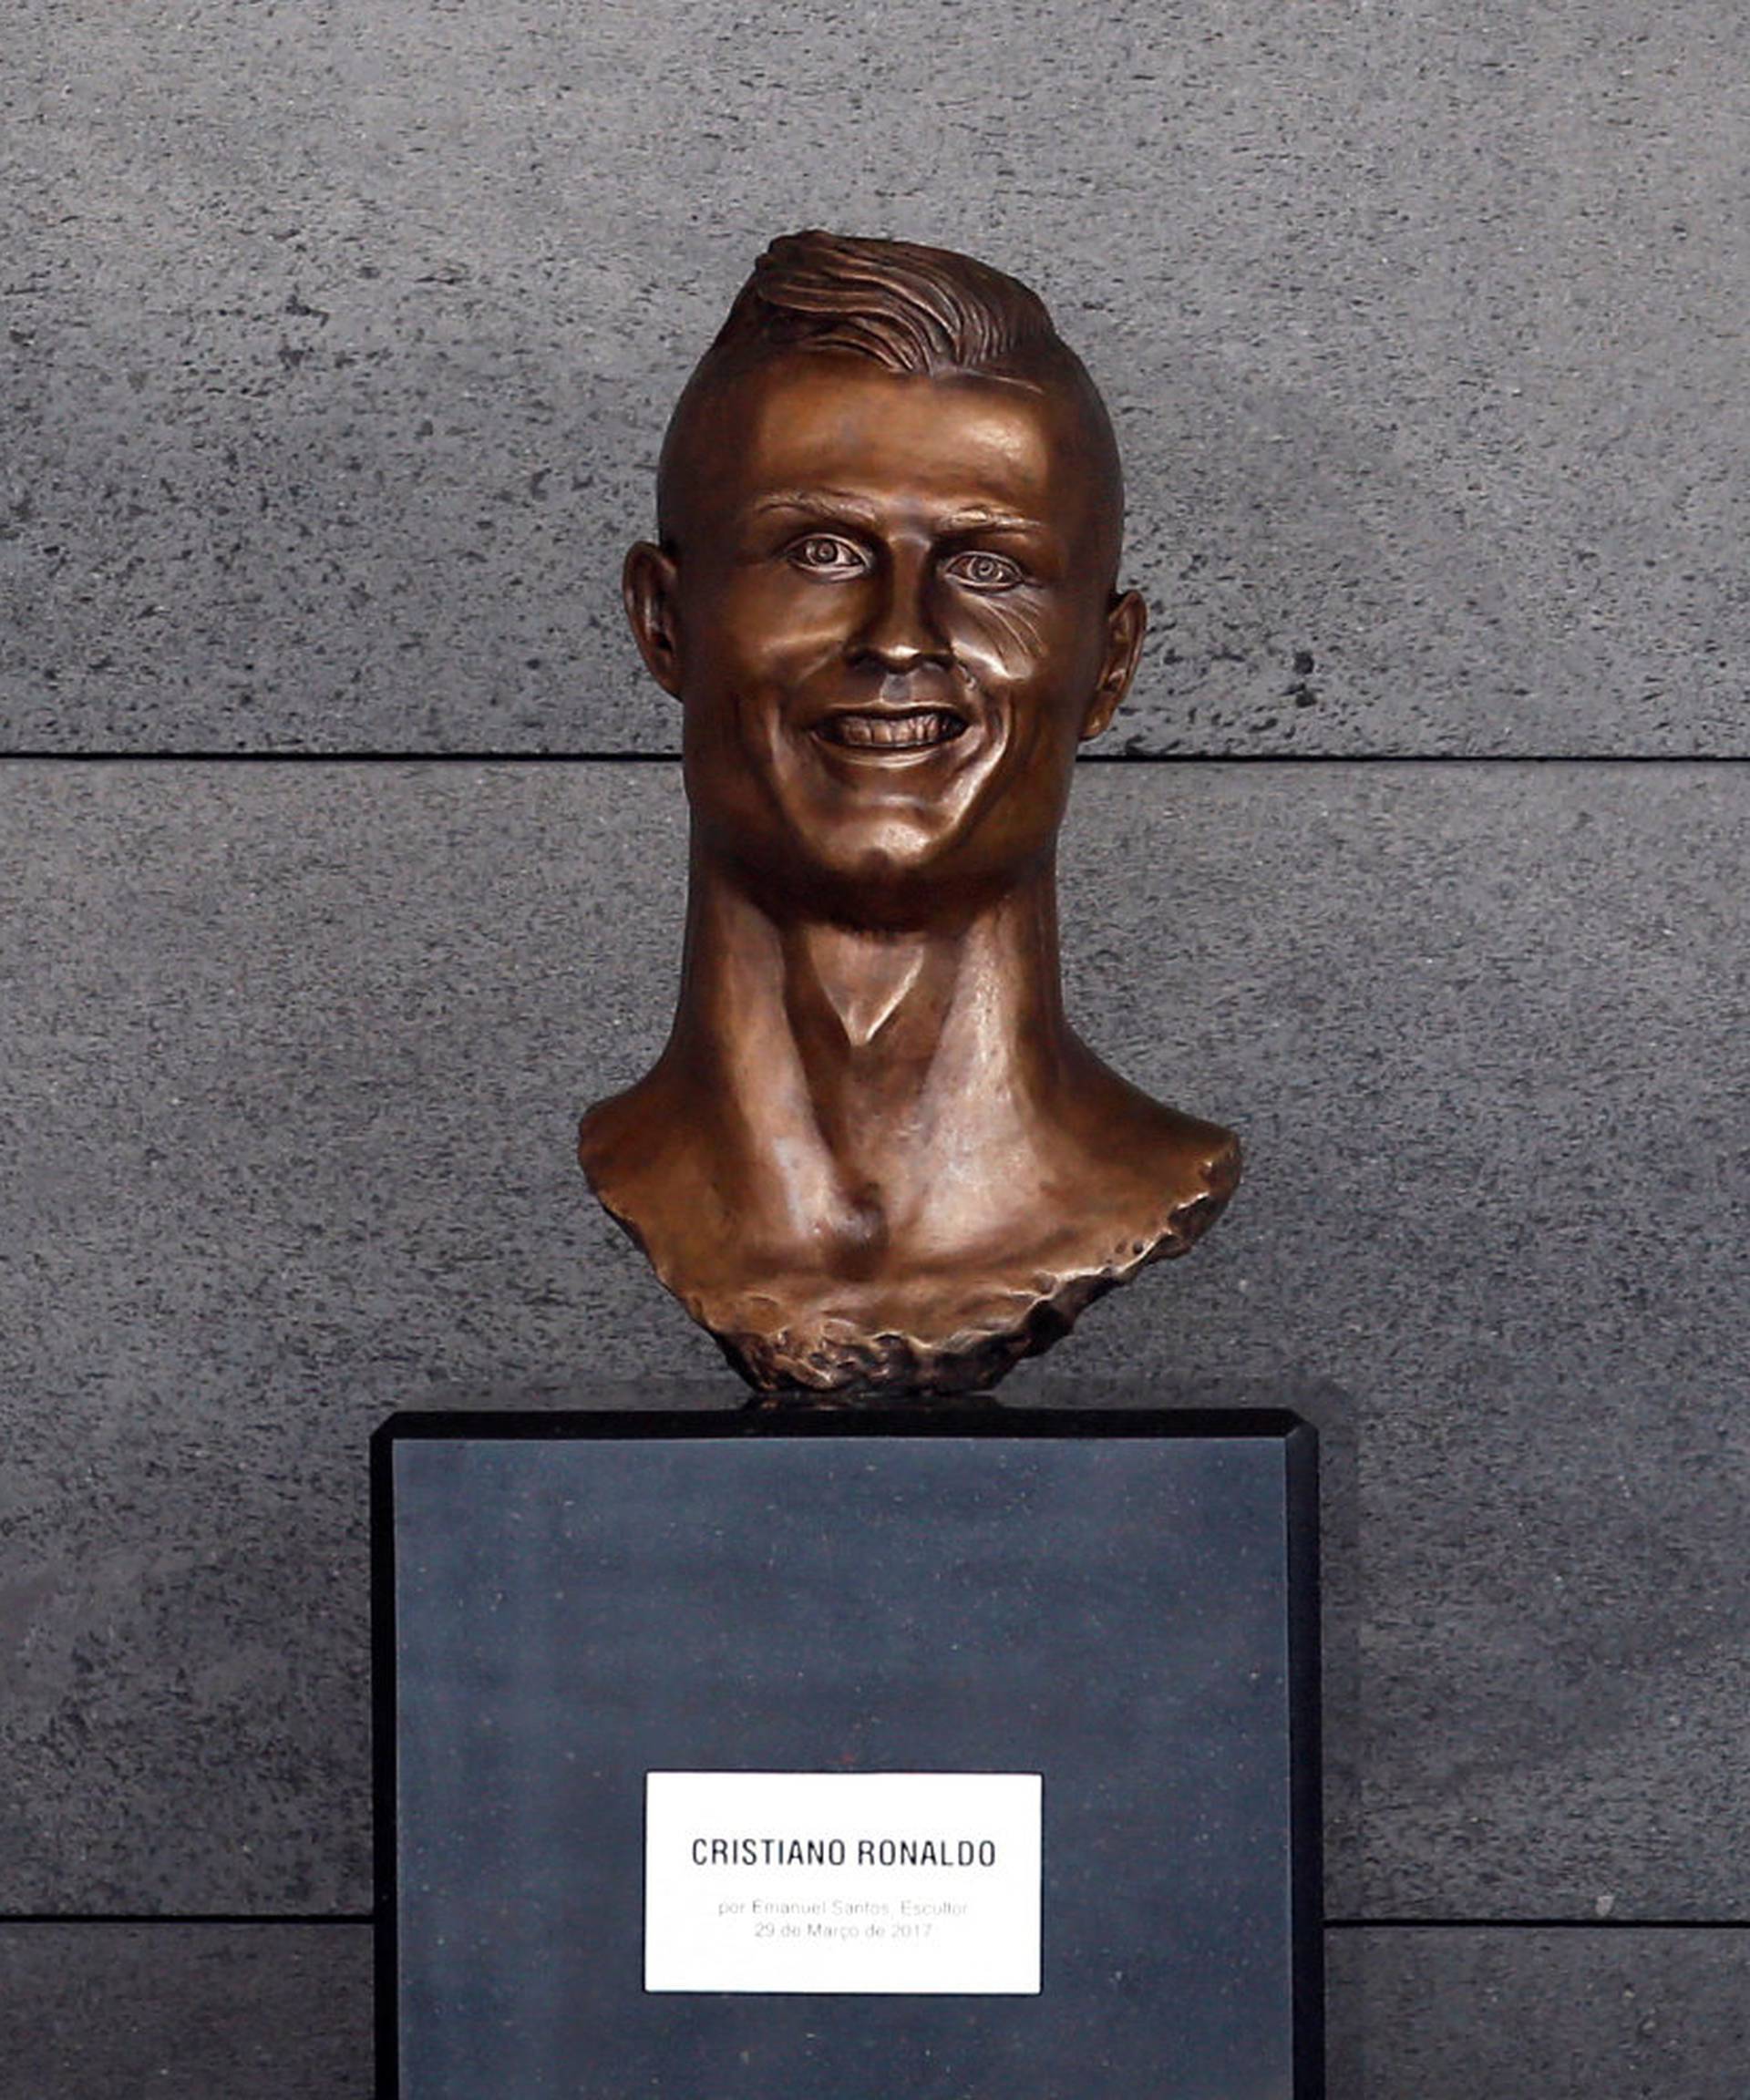 A bust of Real Madrid forward Cristiano Ronaldo is seen before the ceremony to rename Funchal airport as Cristiano Ronaldo Airport in Funchal